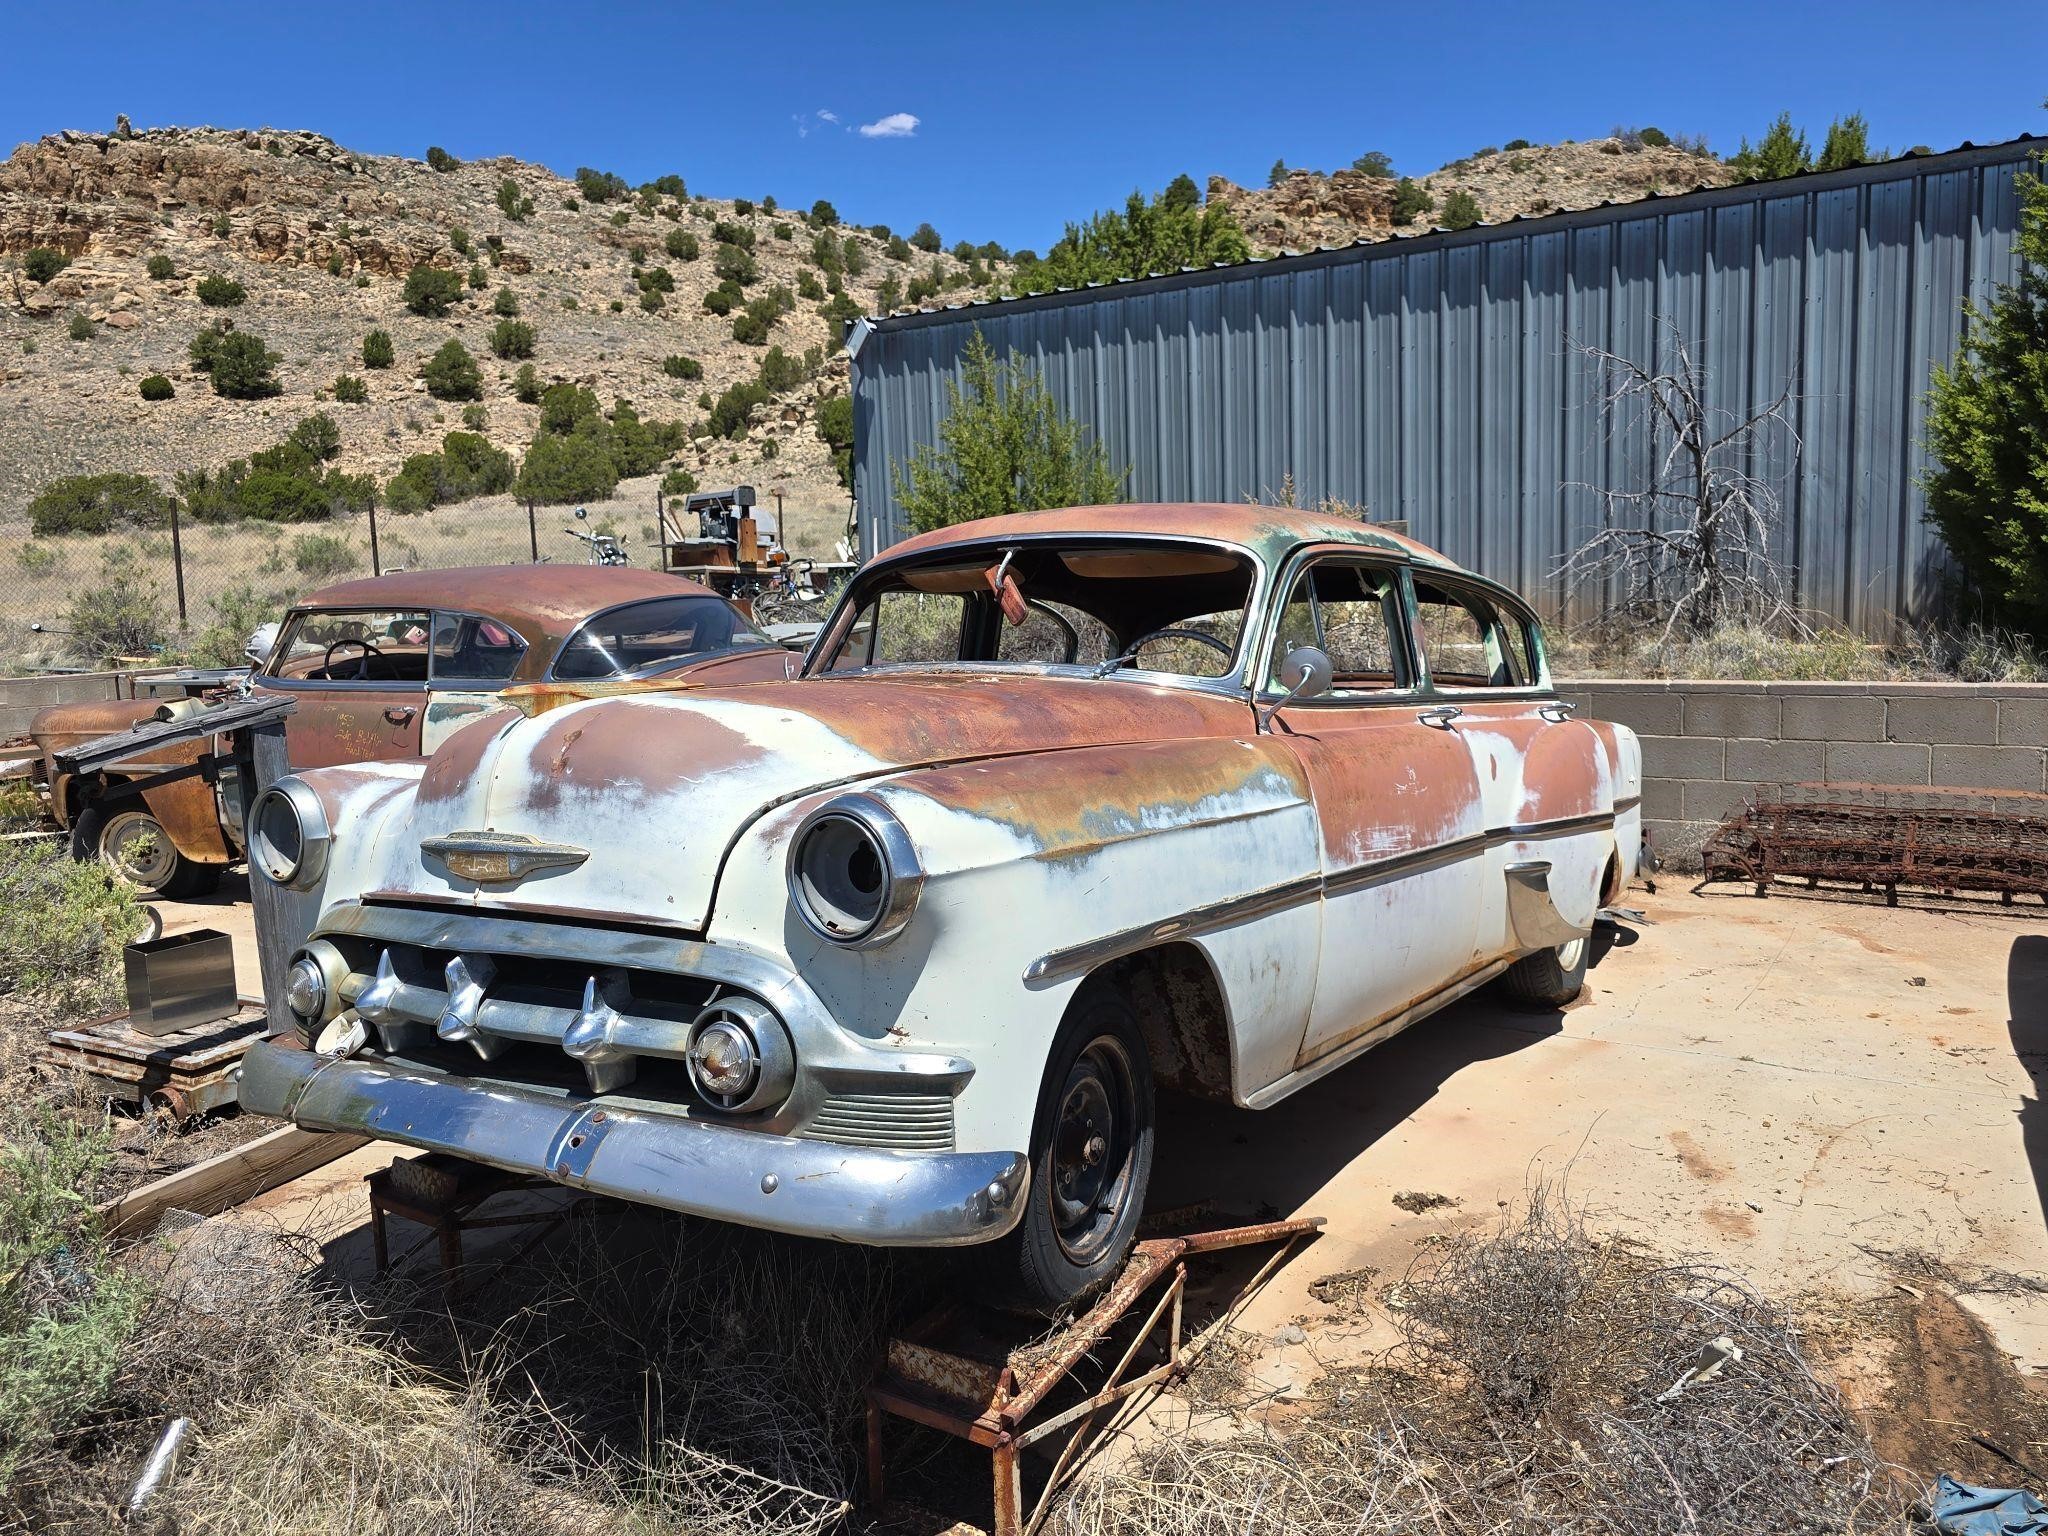 Antique Vehicles, Boats & More - Located in Milan, NM